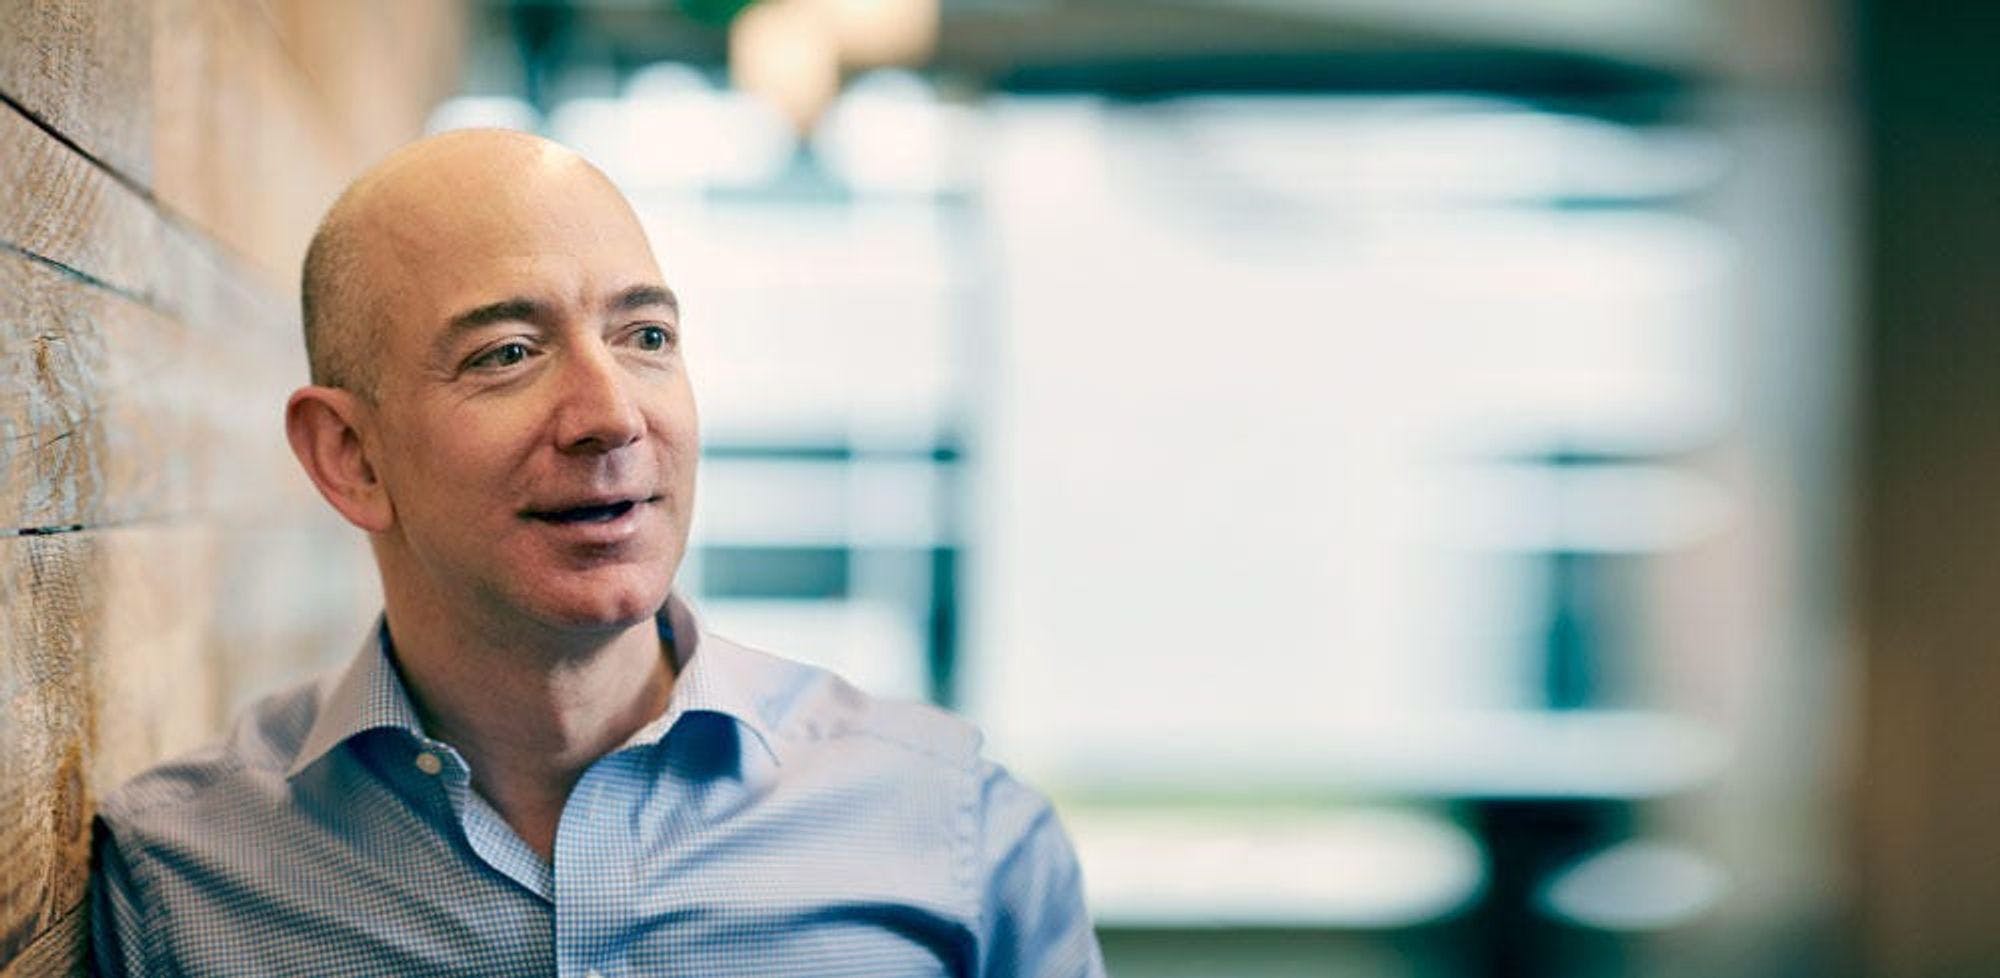 The deal Jeff Bezos got on Basecamp